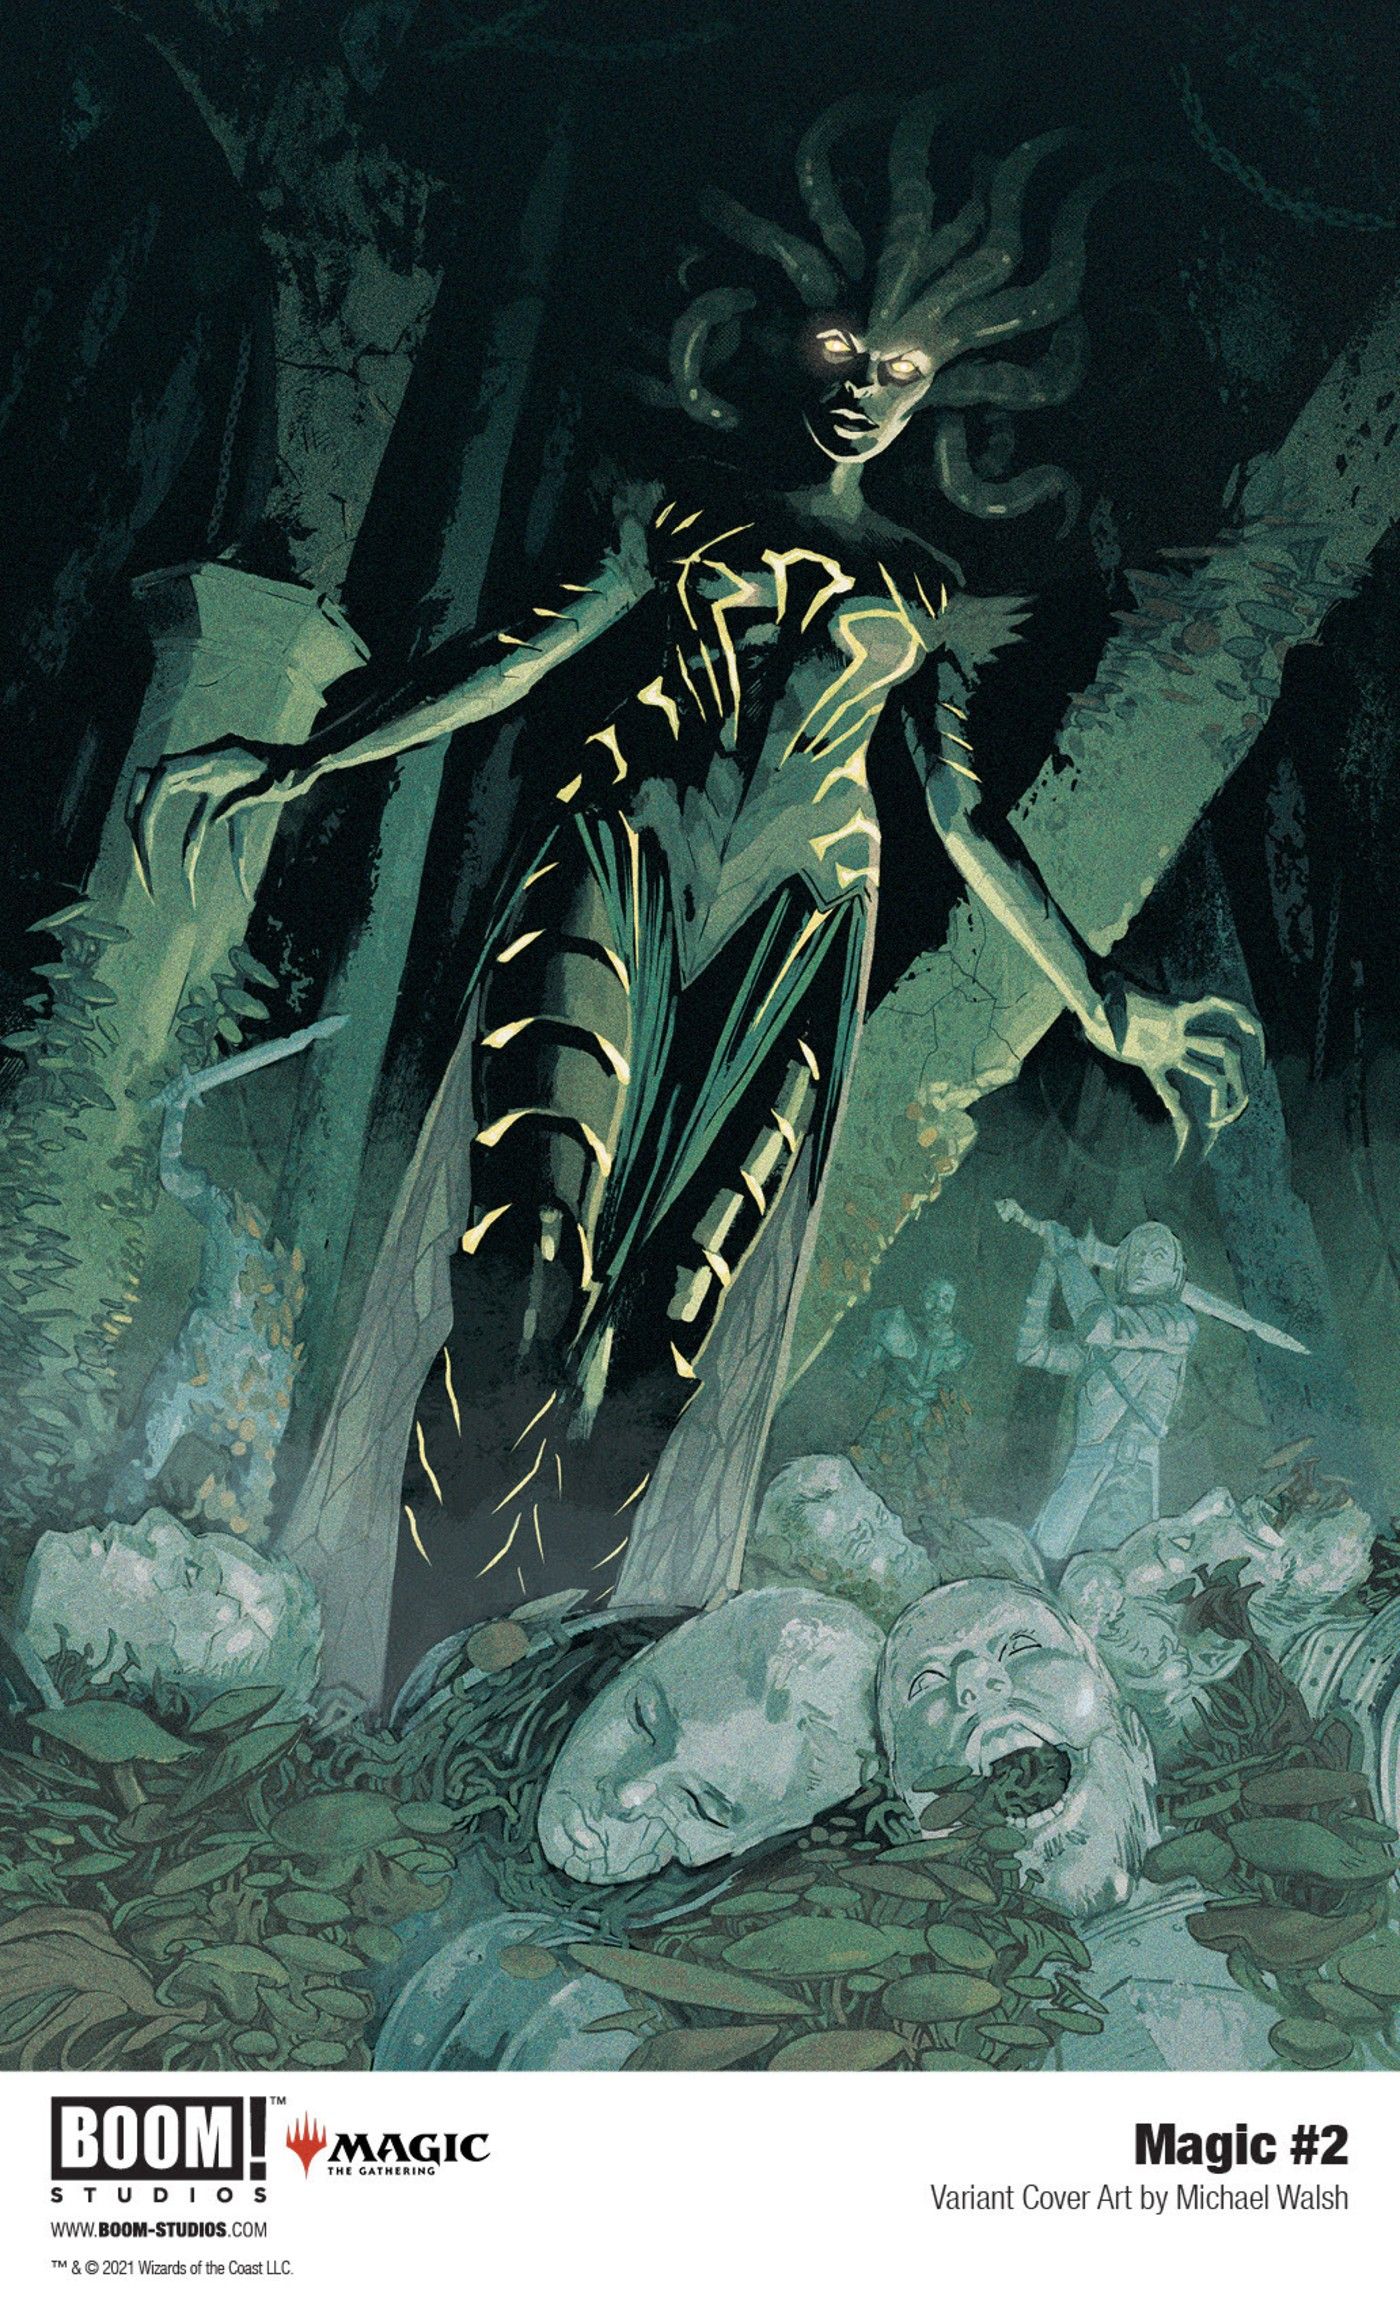 MTG Showcases Savage New Planeswalker Covers in Preview for Magic #2